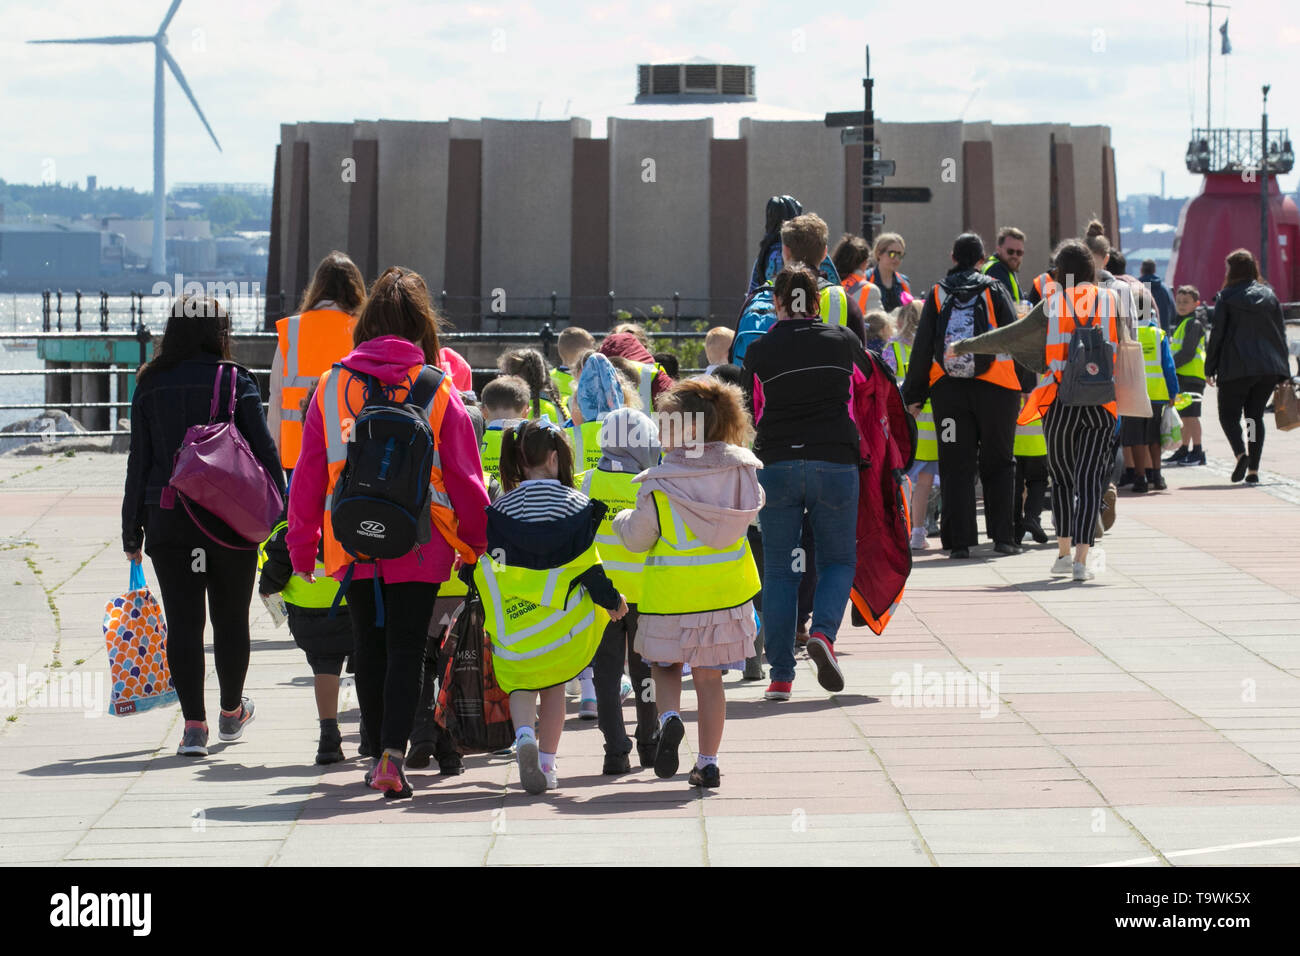 New Brighton, Wallasey. 21st May, 2019. UK Weather: Bright and sunny on the wirral riverside as pre-school children enjoy an escorted walk on the seafront promenade. Each child wearing a hi-vis tabard printed 'Slow down for Bobby' Twenty's Plenty; The Bobby Colleran Trust is Road Safety Charity offering advice and guidance for Parents and Schools. Since Bobby’s accident, his family have campaigned for safer roads outside all schools. Credit; MediaWorldImages/AlamyLiveNews. Stock Photo